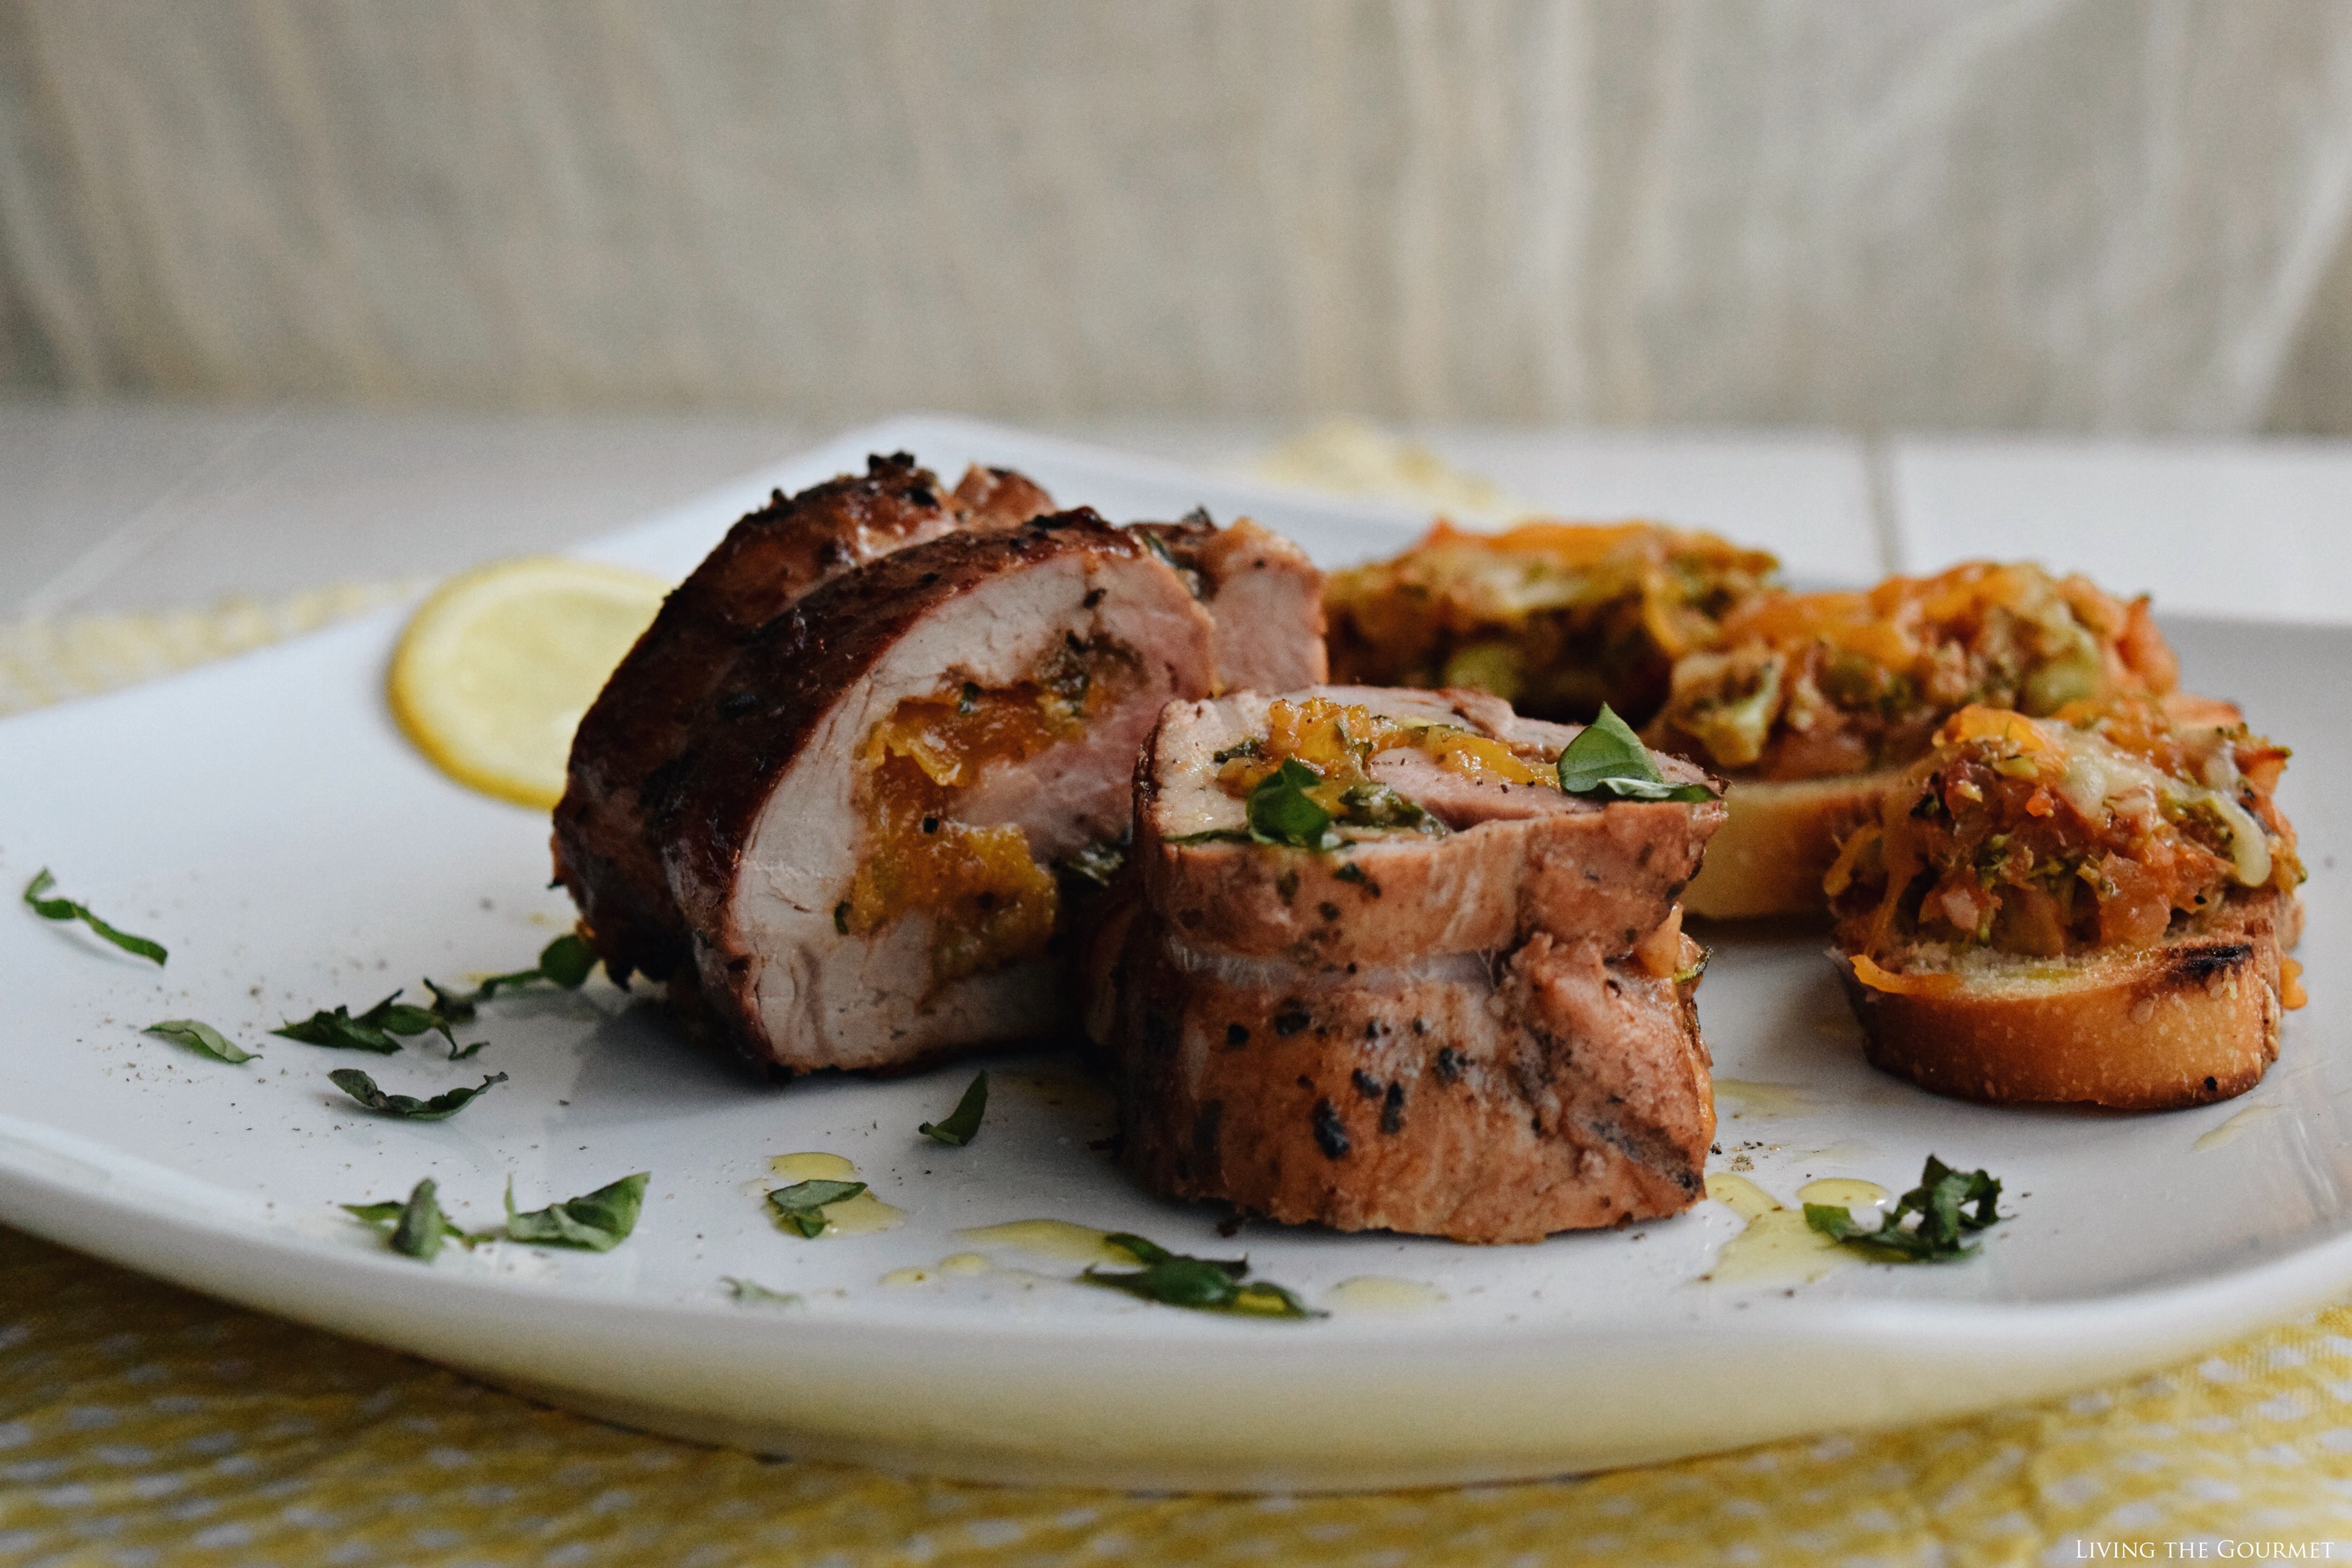 Living the Gourmet: Stuffed Pork Loin with Apricots, Basil, Garlic and Cheddar